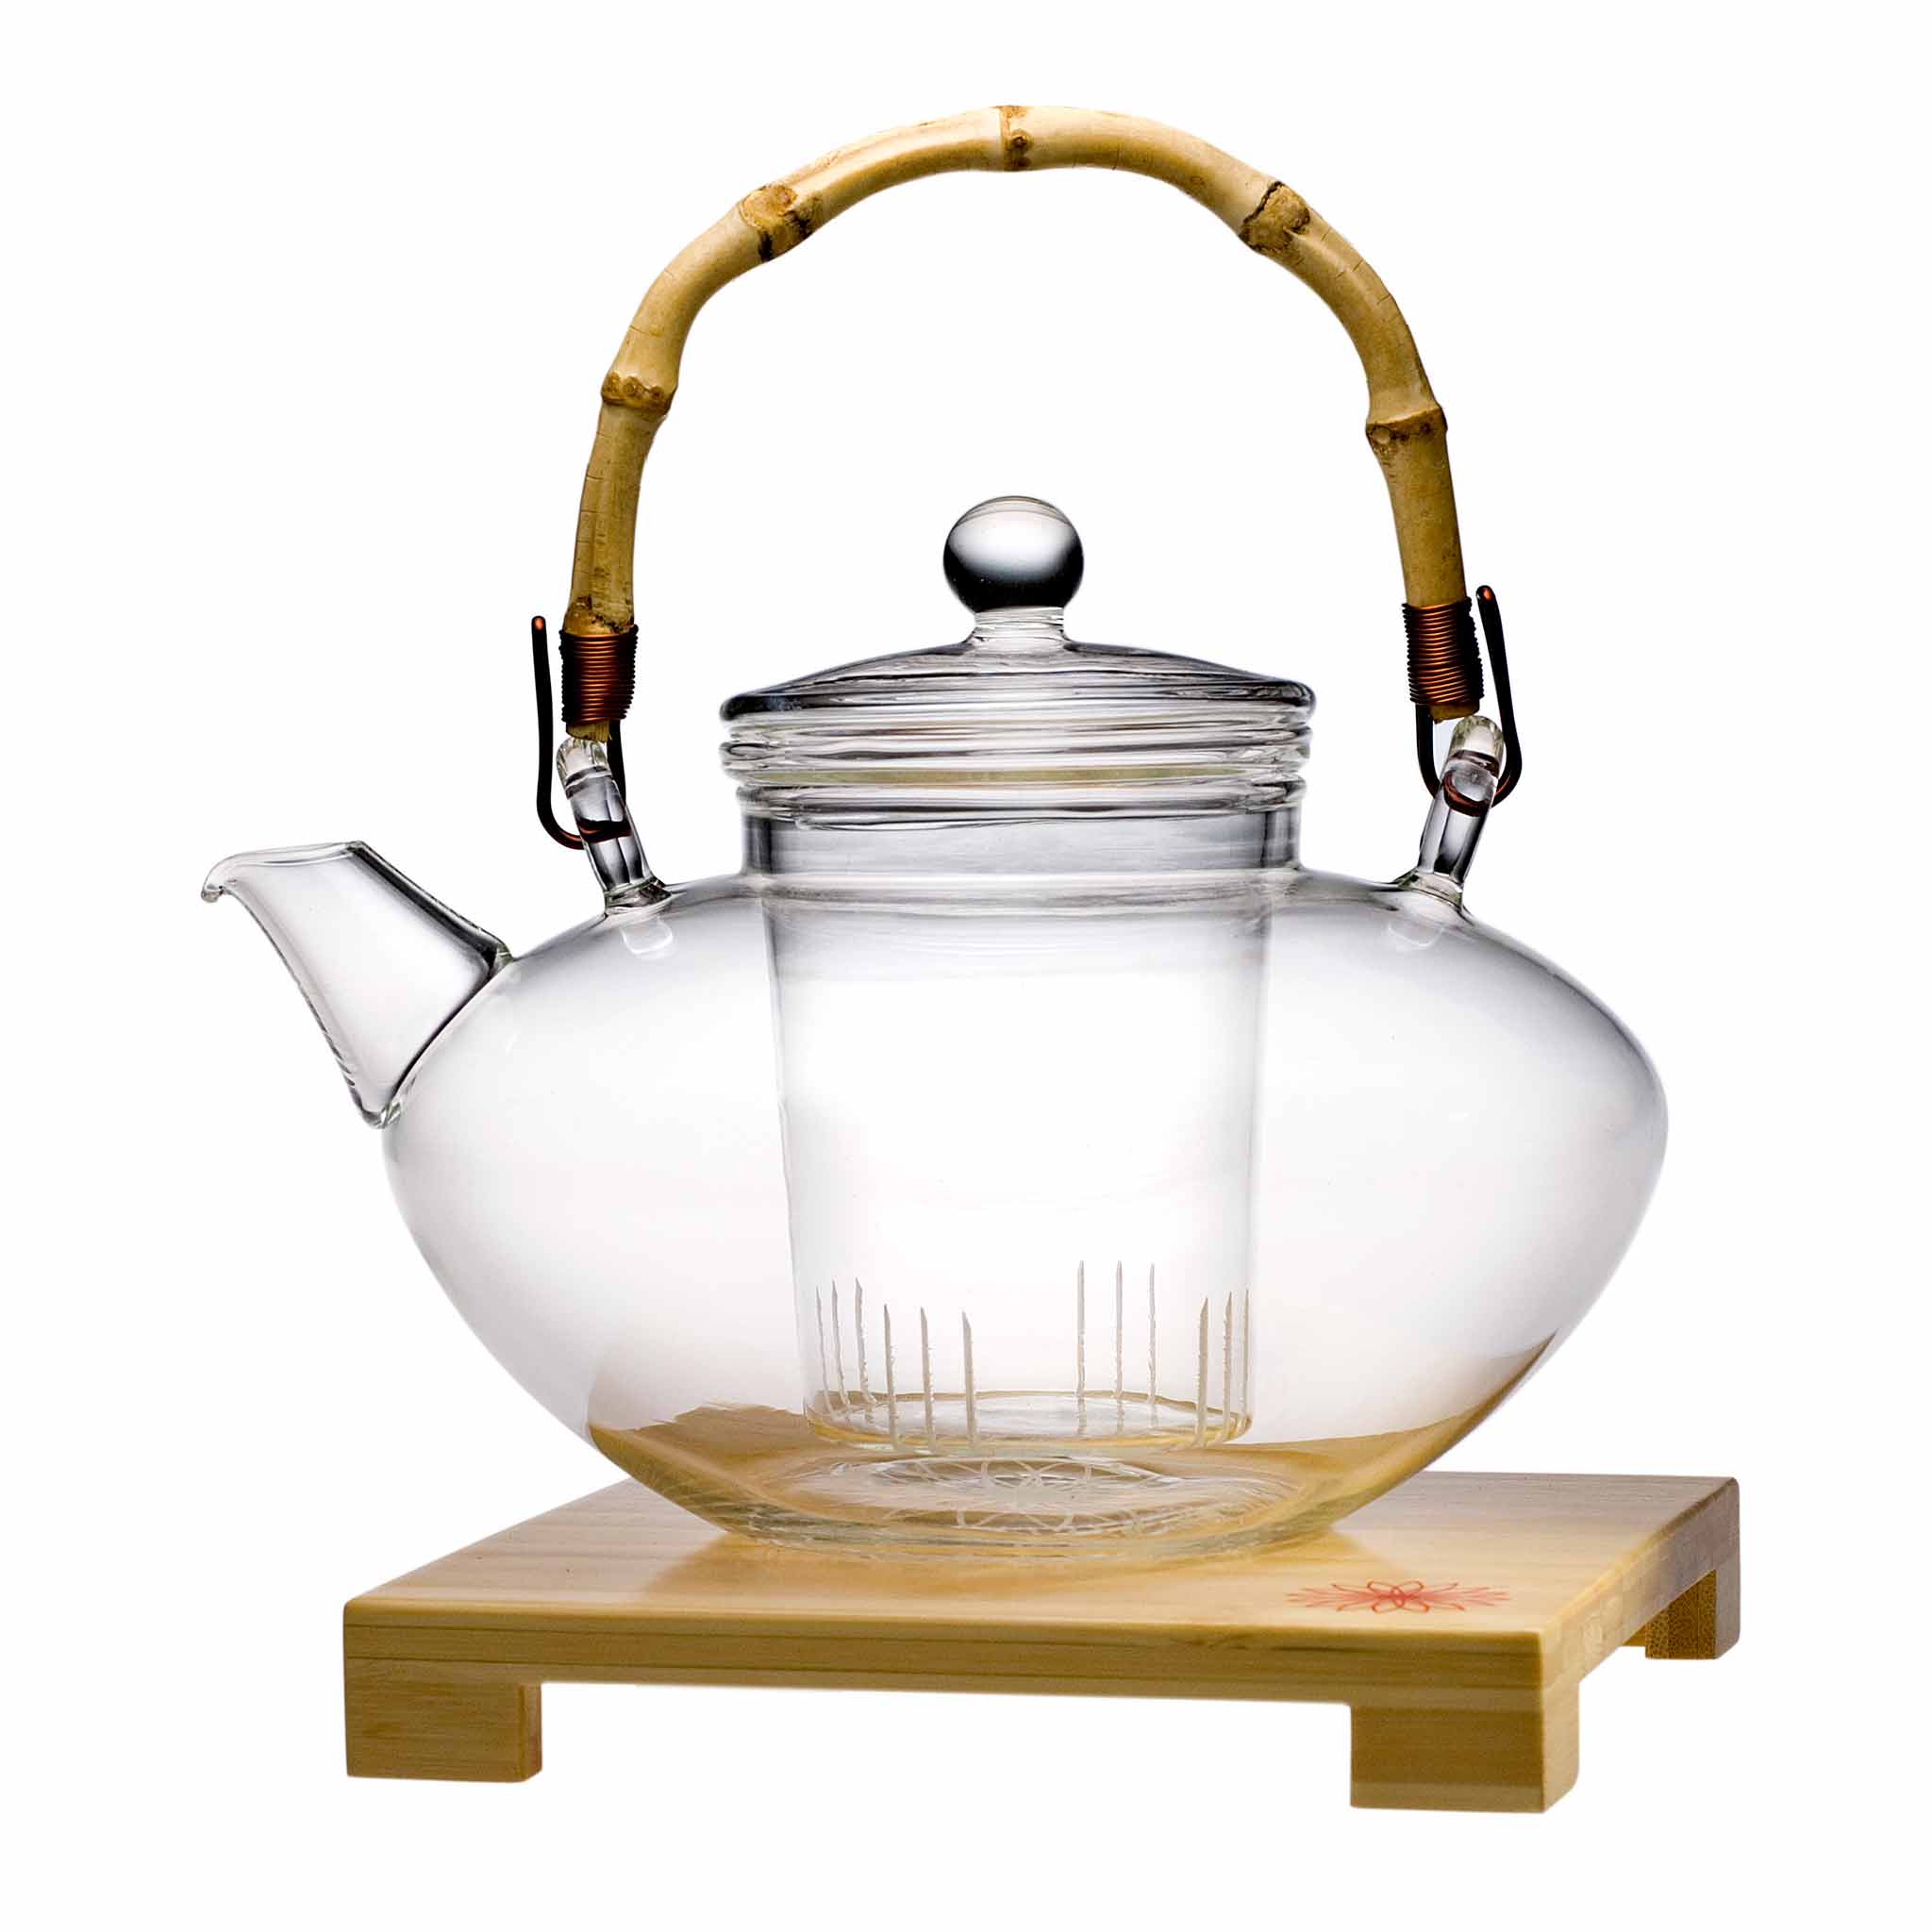 Glass Teacup w/ infuser & Bamboo lid (15oz.) - Honey and the Hive